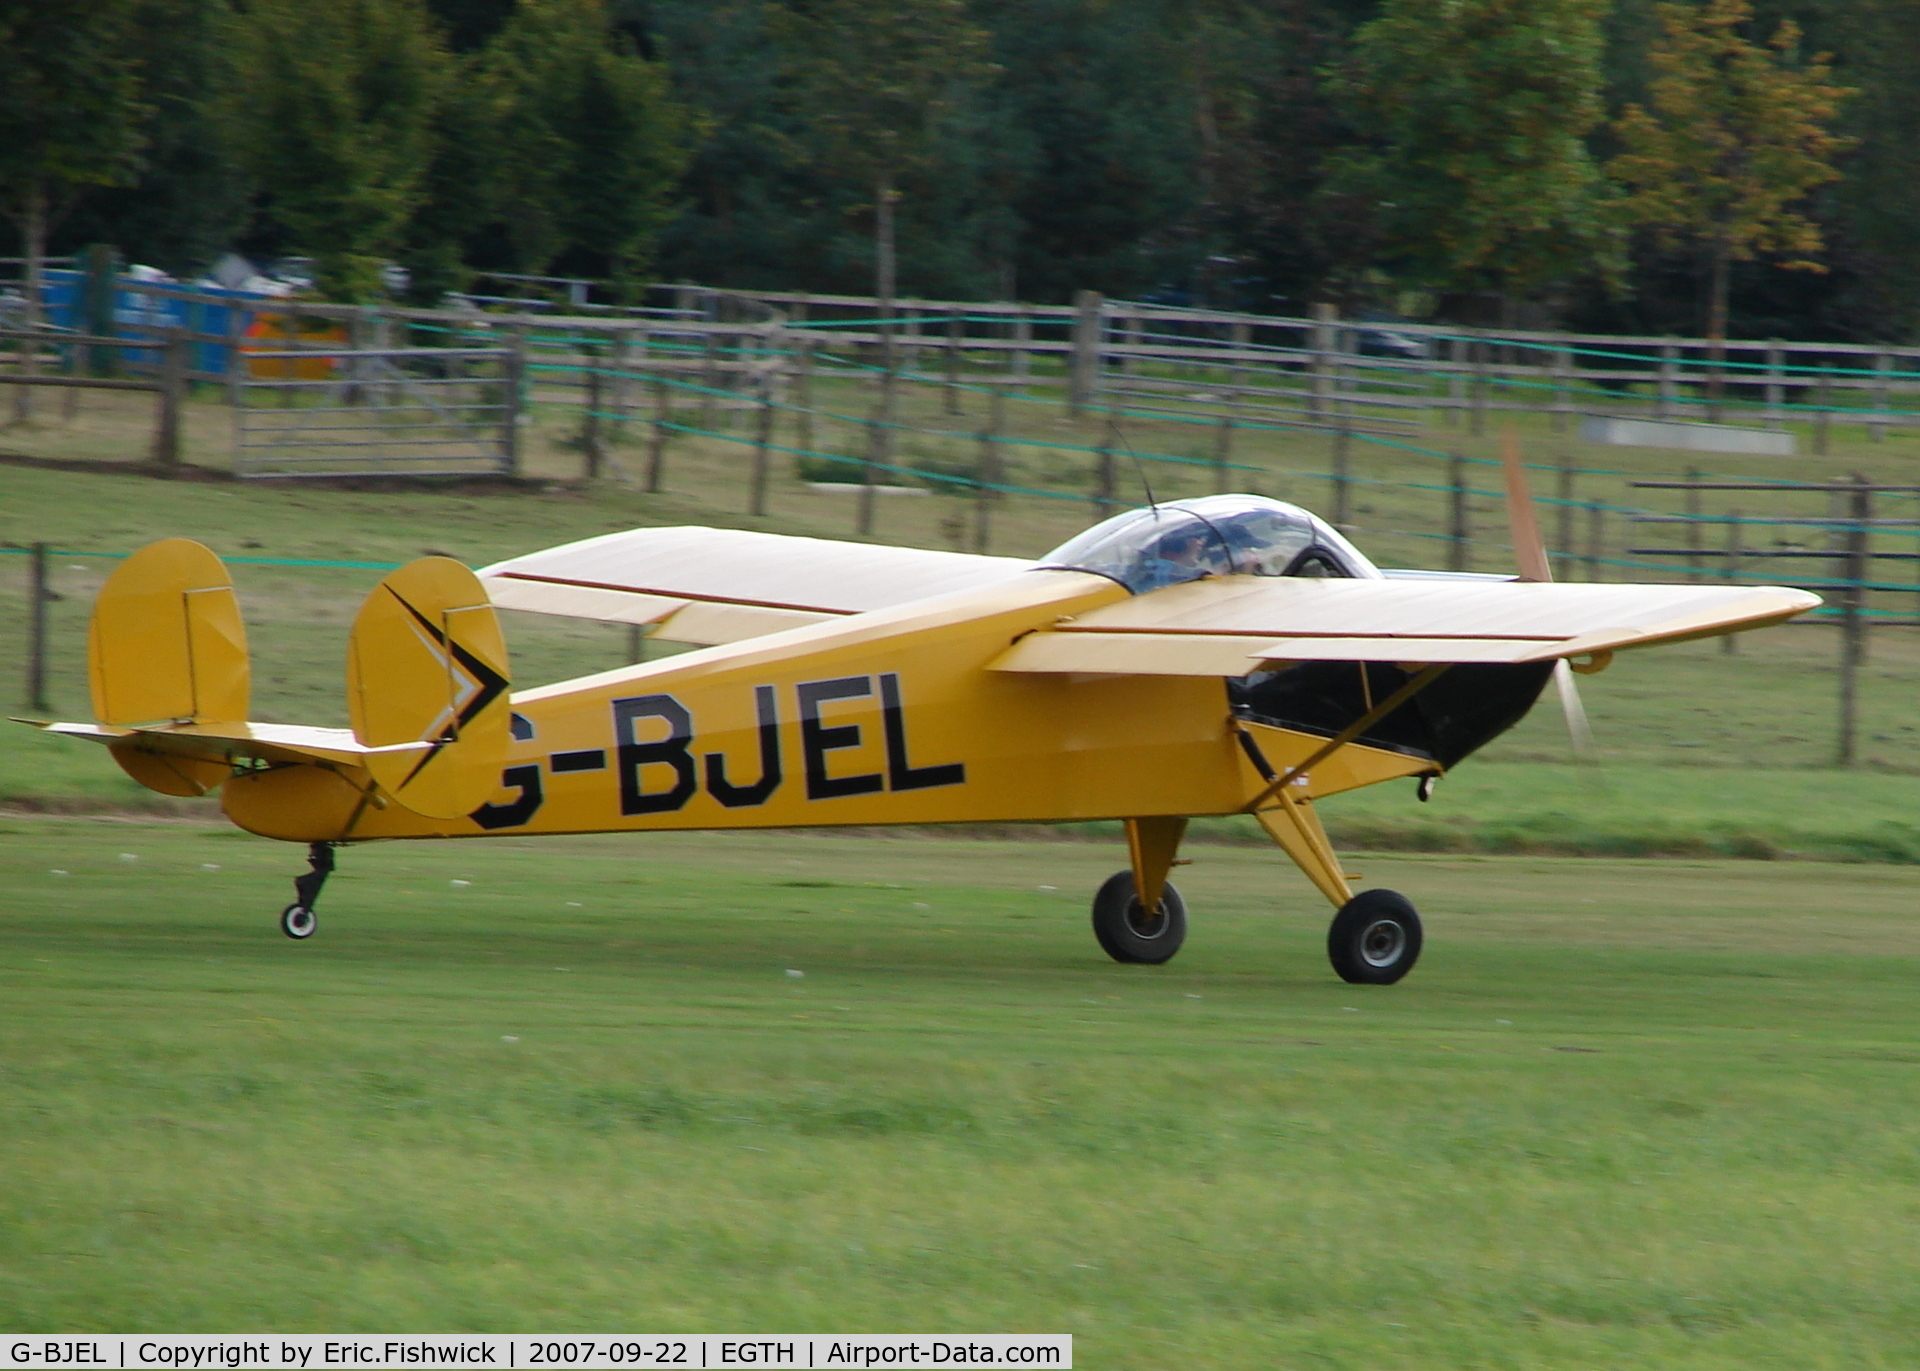 G-BJEL, 1951 Nord NC-854S C/N 113, 2. G-BEJL at Shuttleworth Collection Air Display